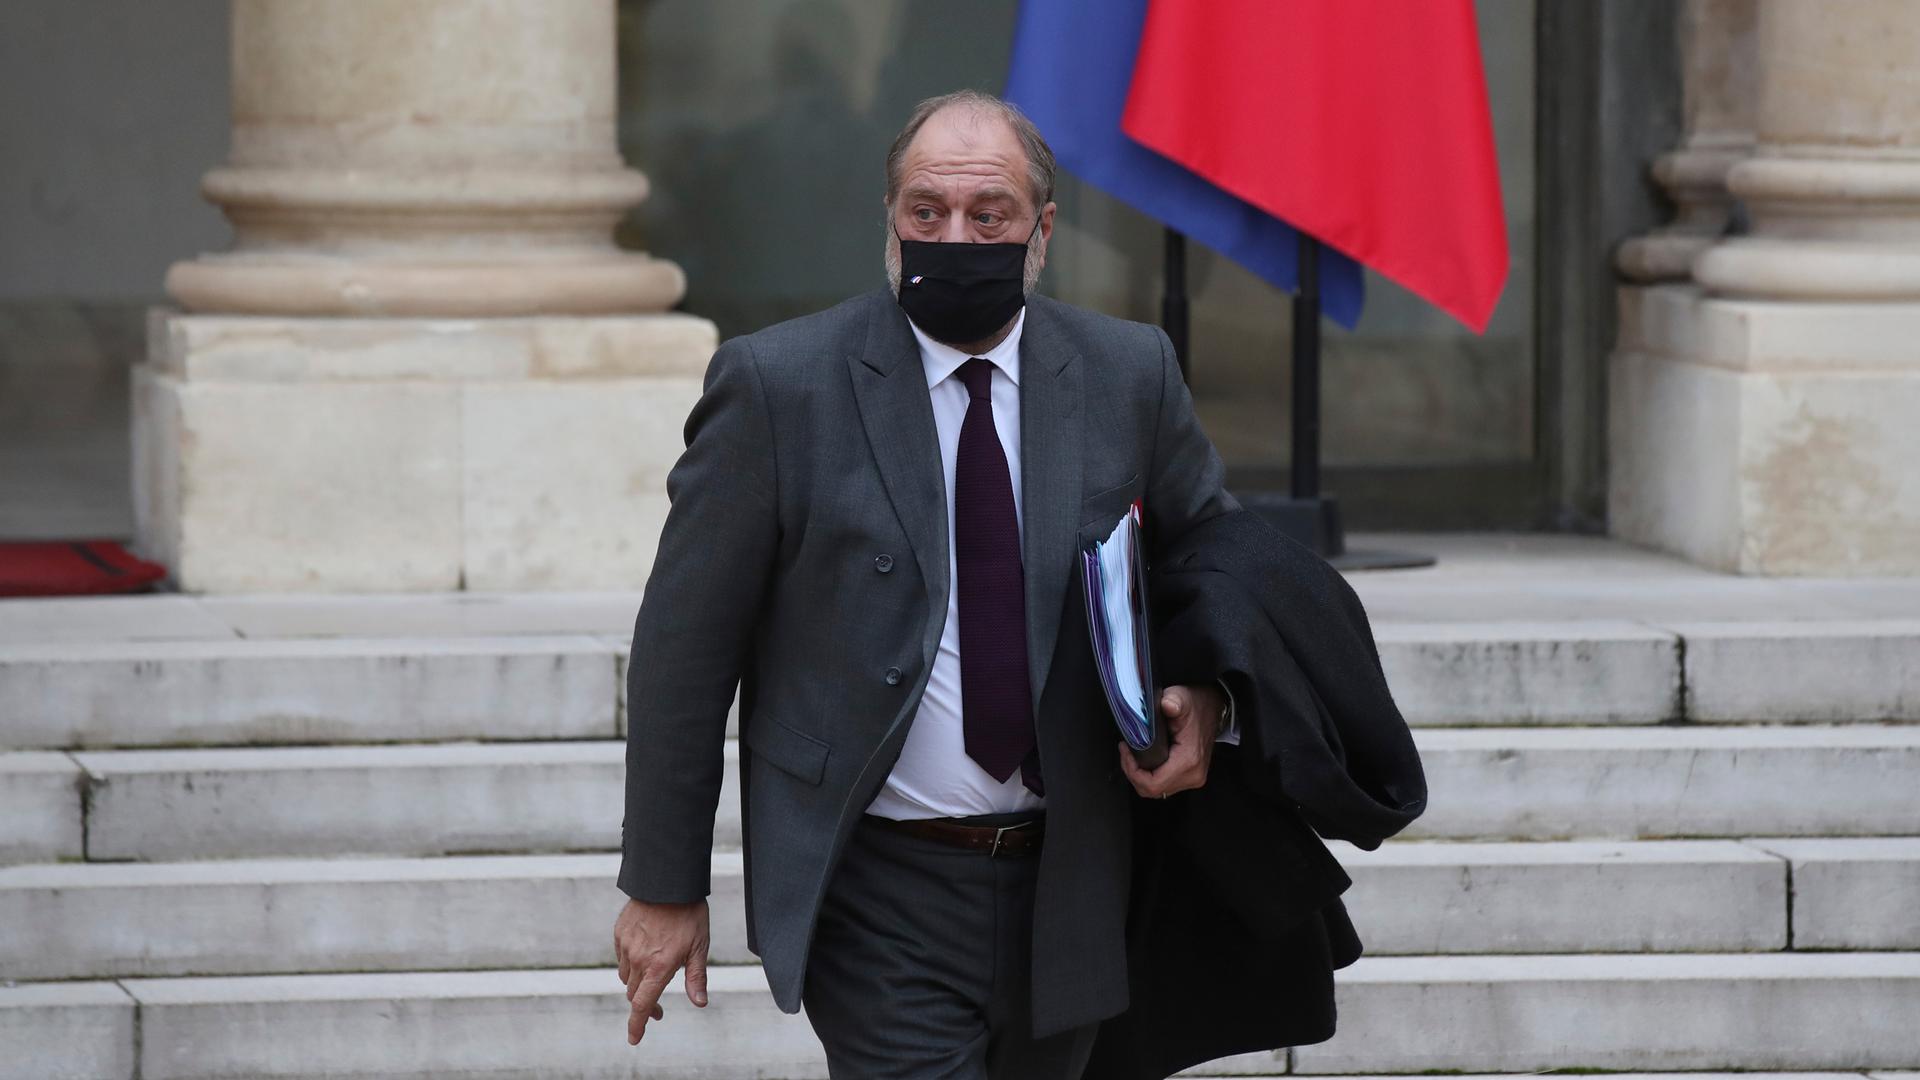 French Justice Minister Eric Dupond-Moretti is shown wearing a dark-colored face mask and gray suit while carrying a folder.